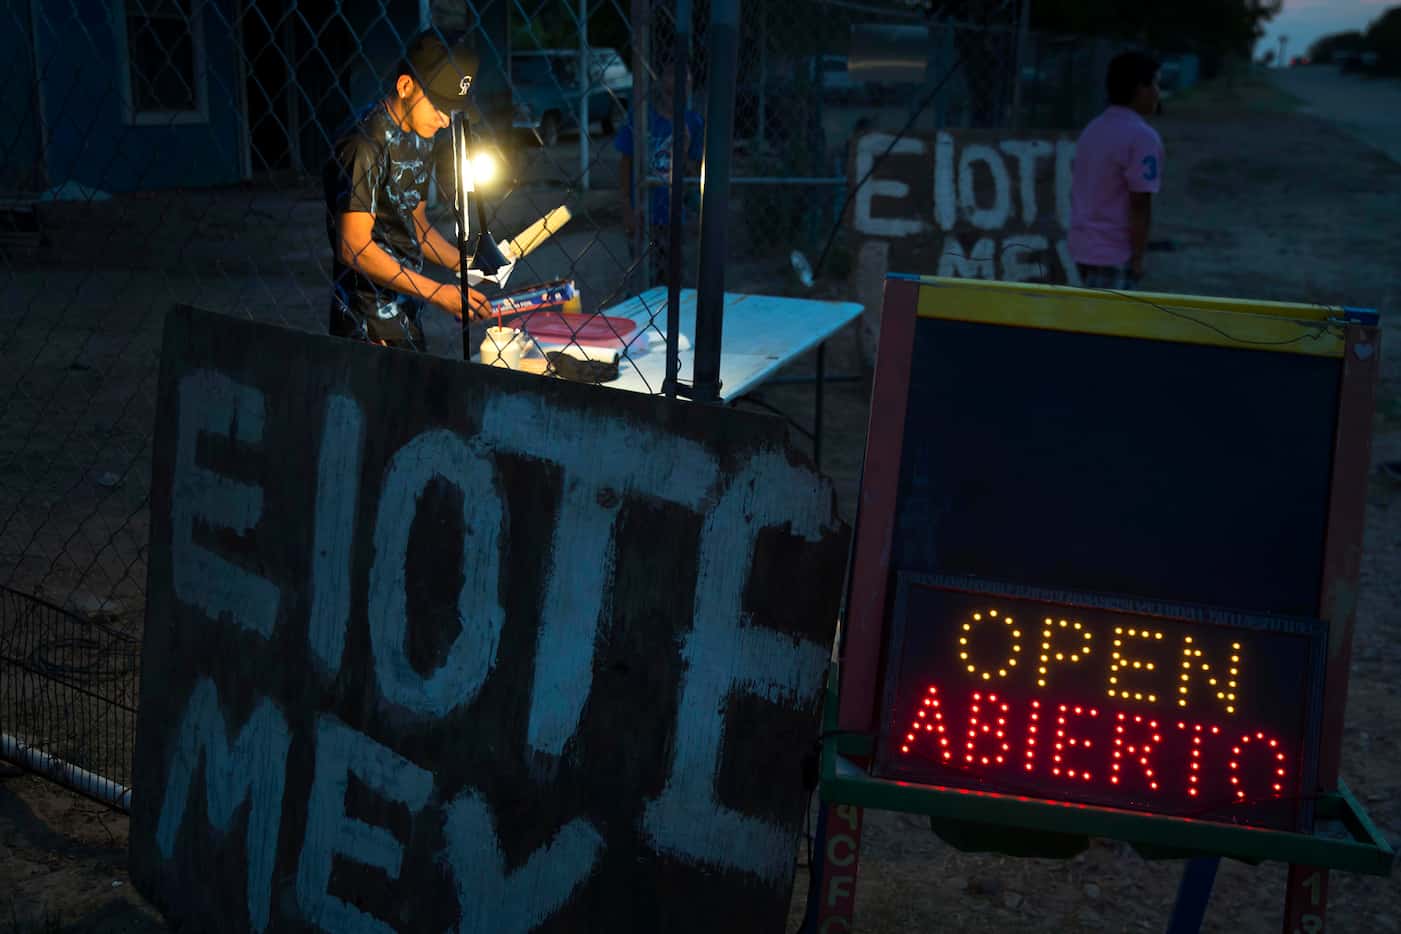 Cesar Rivera sells Elotes (grilled Mexican street corn) outside his grandmother's home in El...